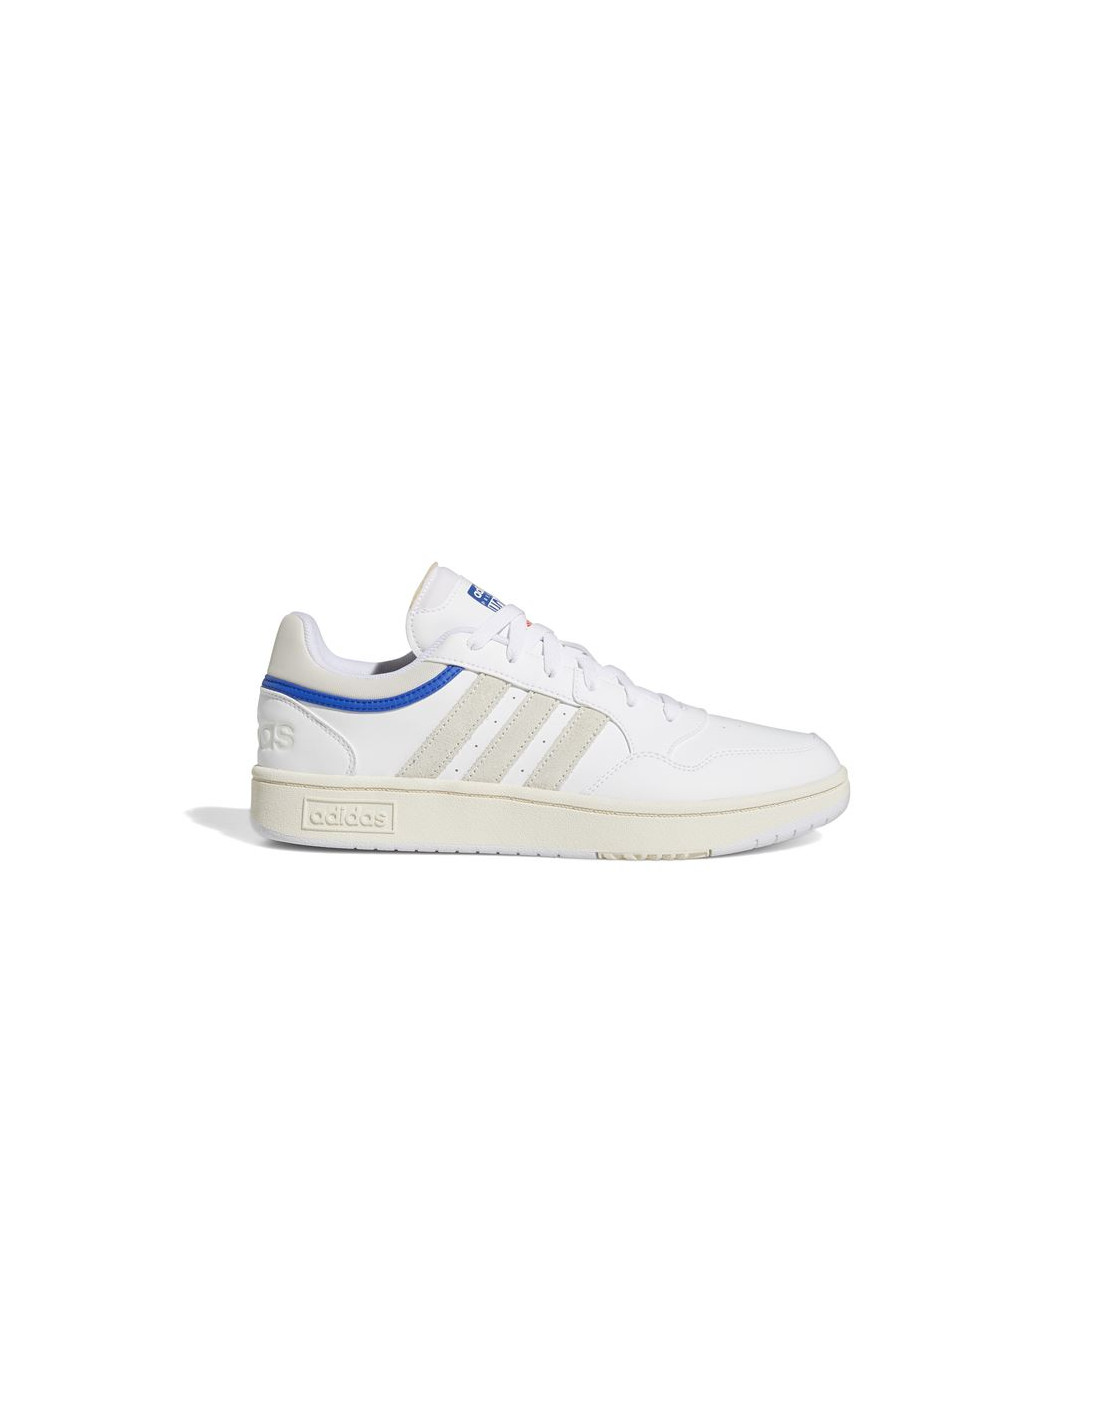 Zapatillas adidas hoops 3.0 low classic vintage m white